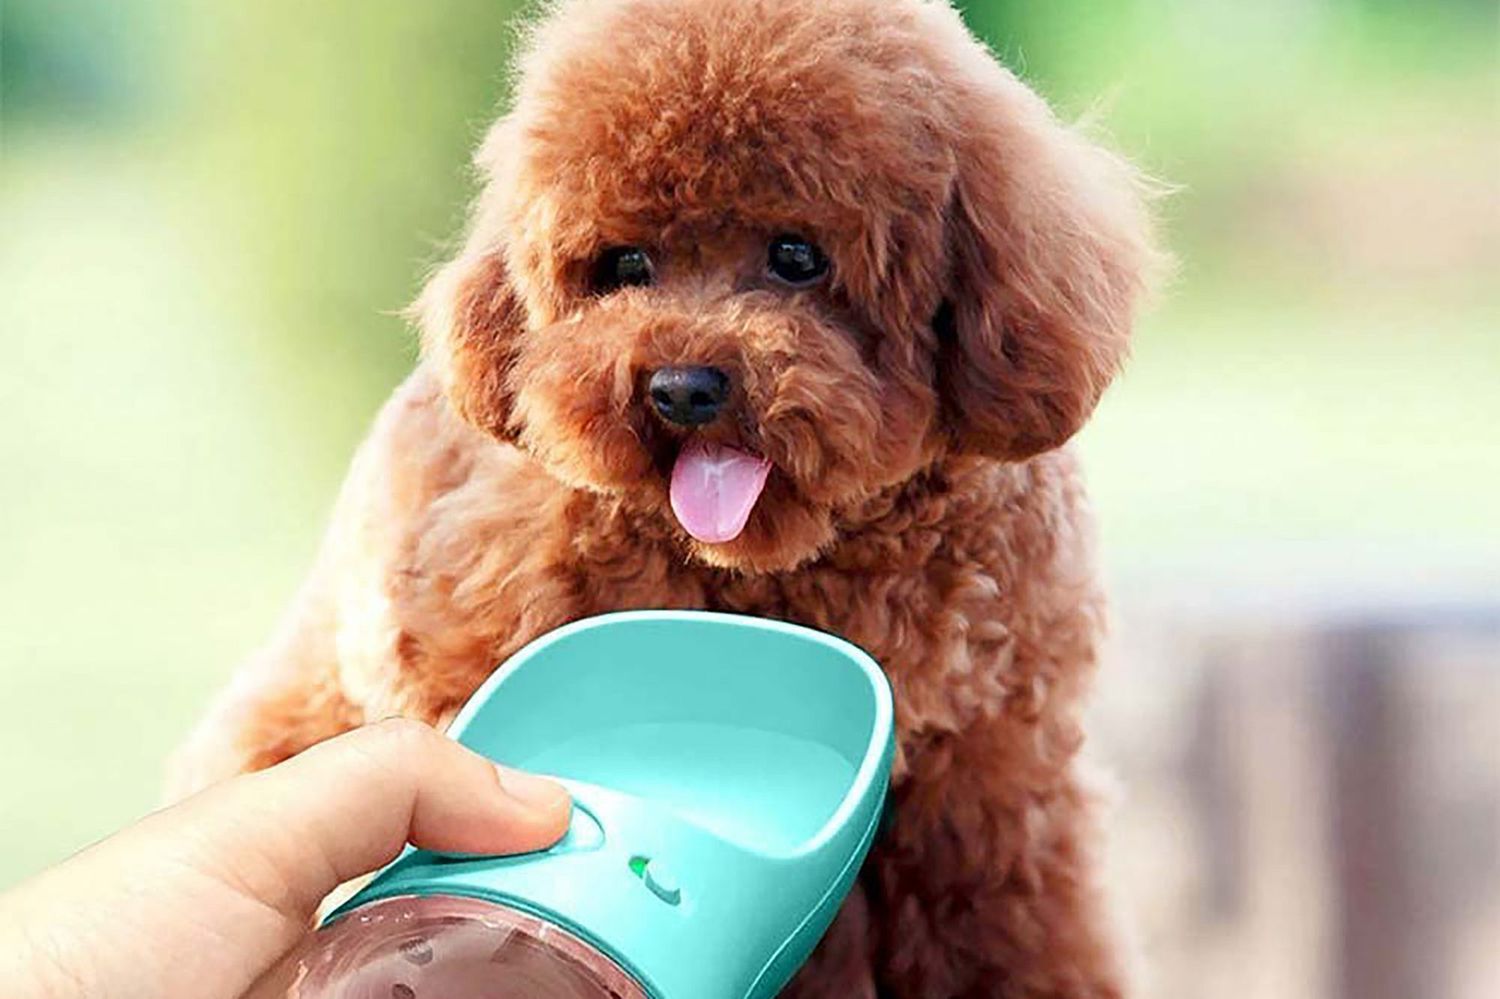 Bottle Feeder for Drinking Stainless Steel Portable Pet Dog Cat Outdoor Travel Water Bowl Eco-Friendly Pet Feeder Bowl Pet Safe Bowl for Dogs and Cats 